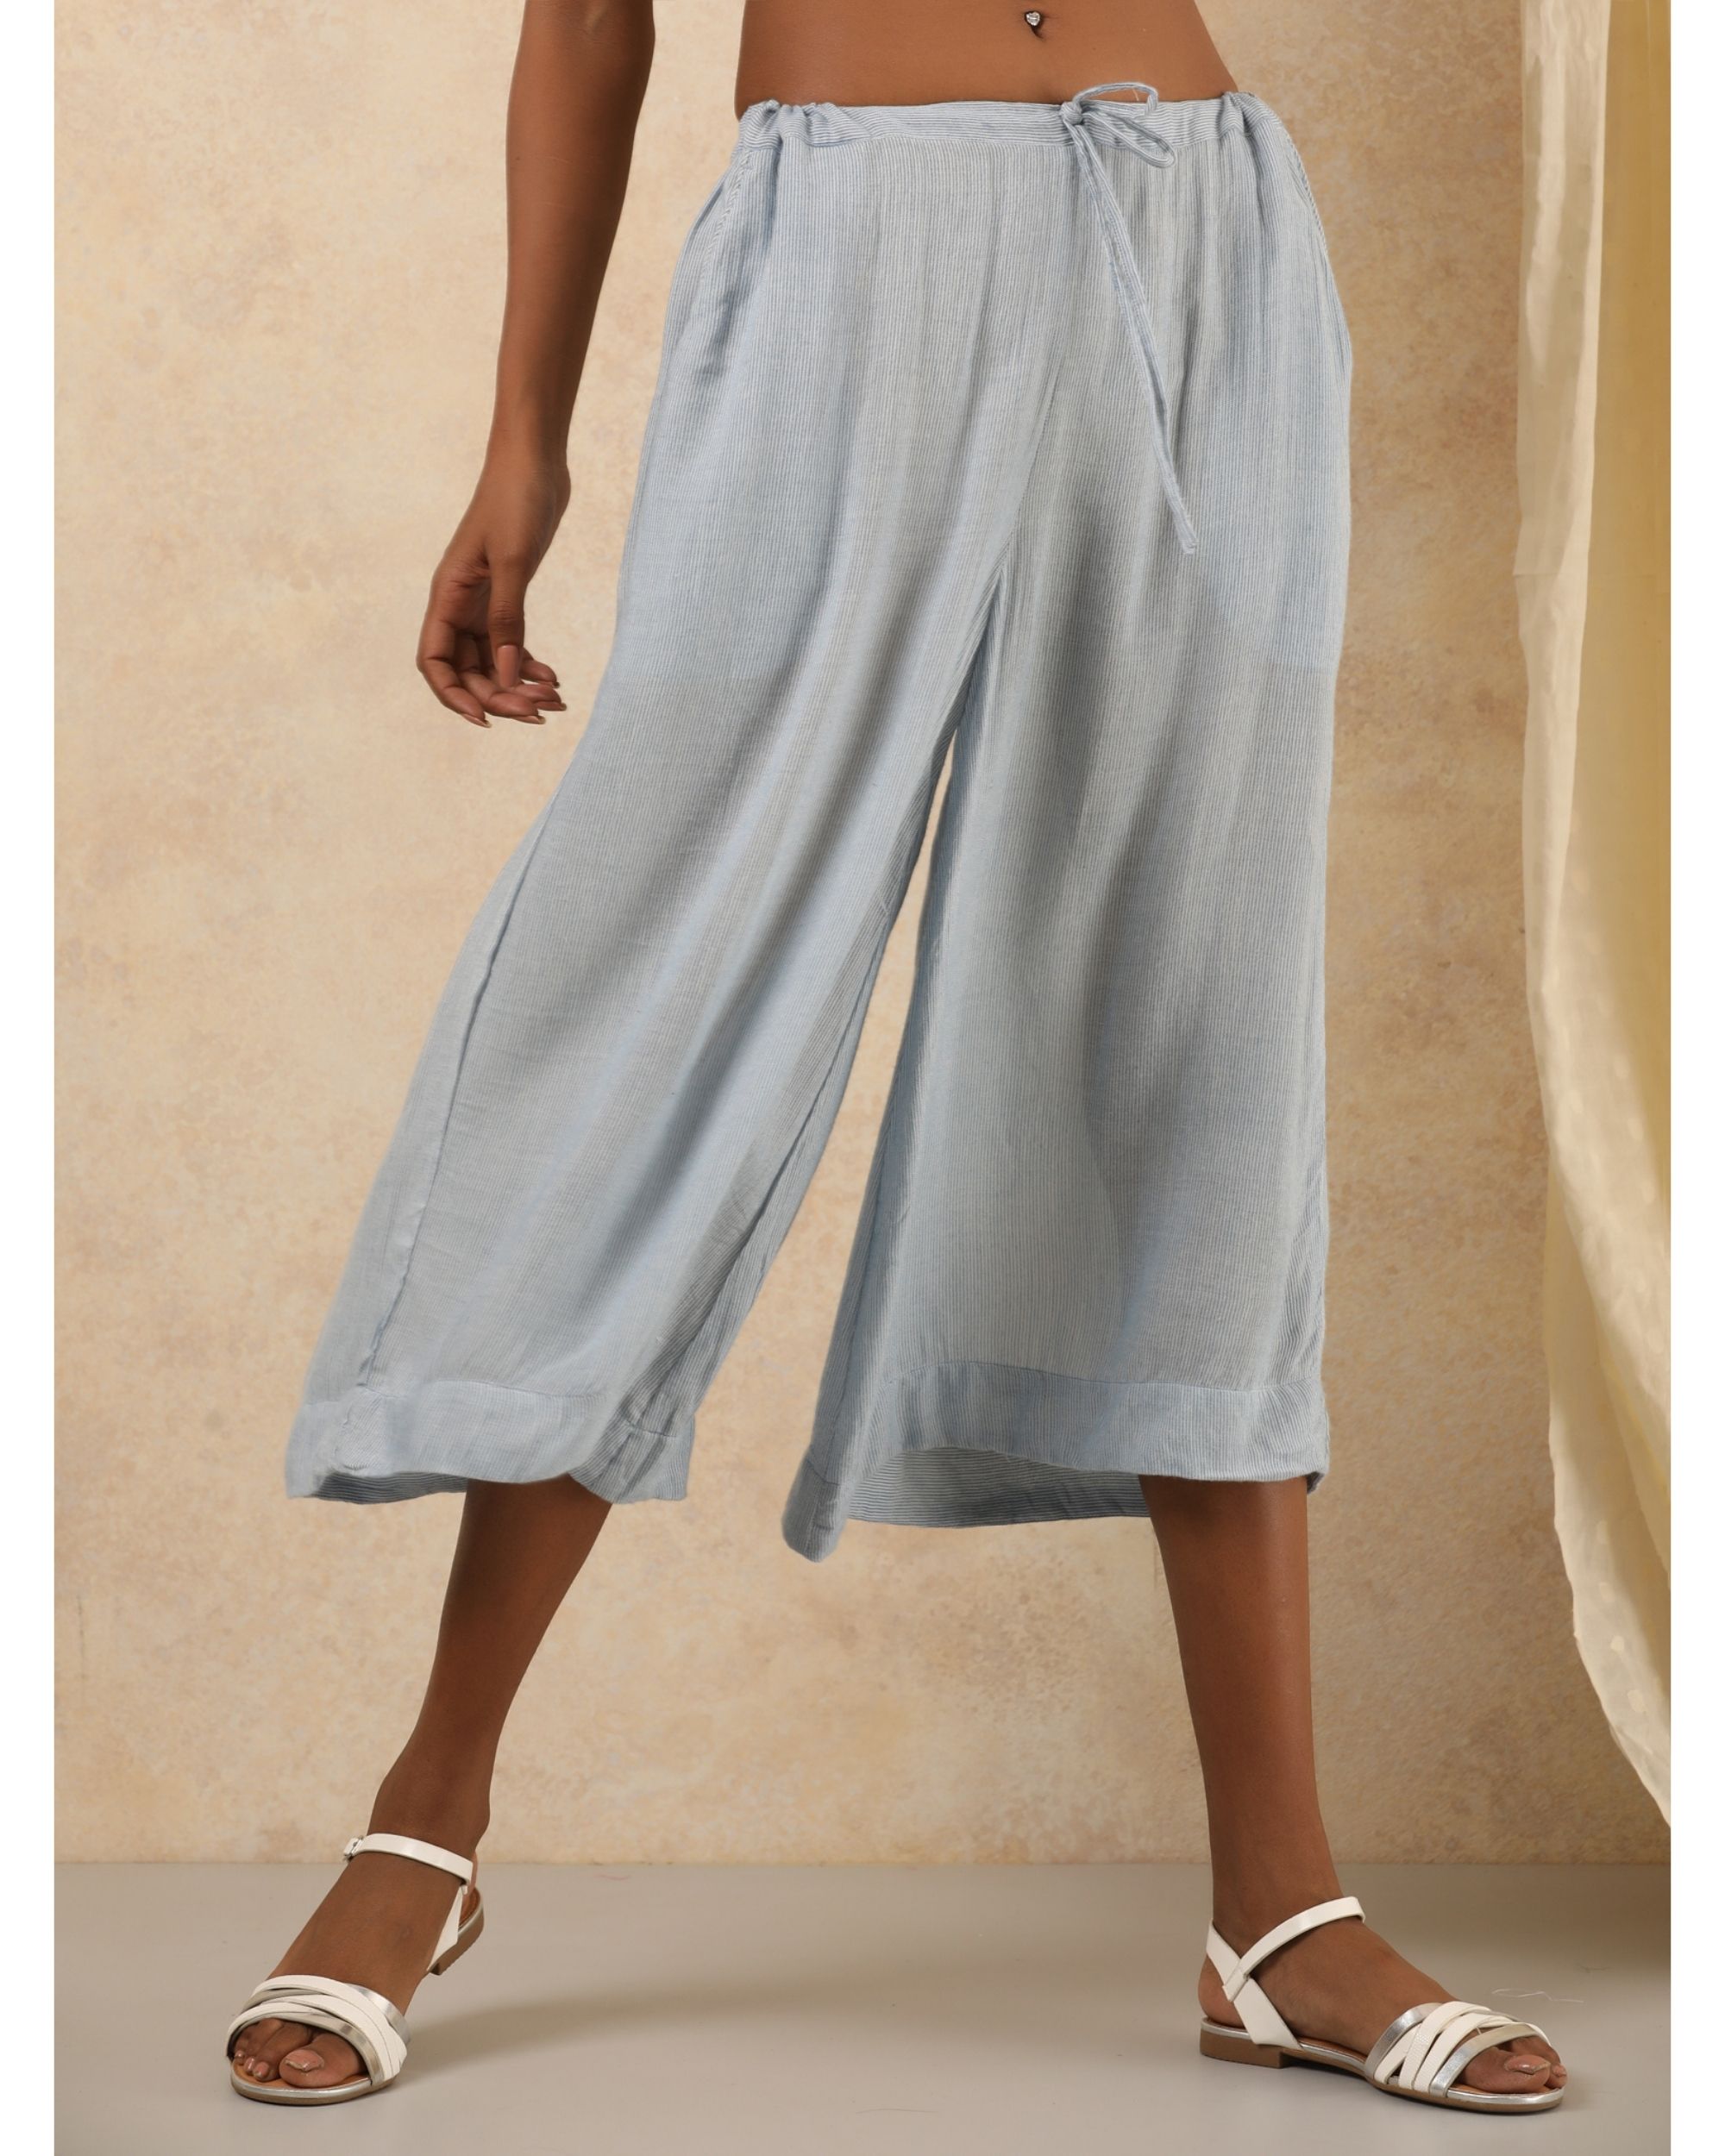 Blue and white cotton modal pants